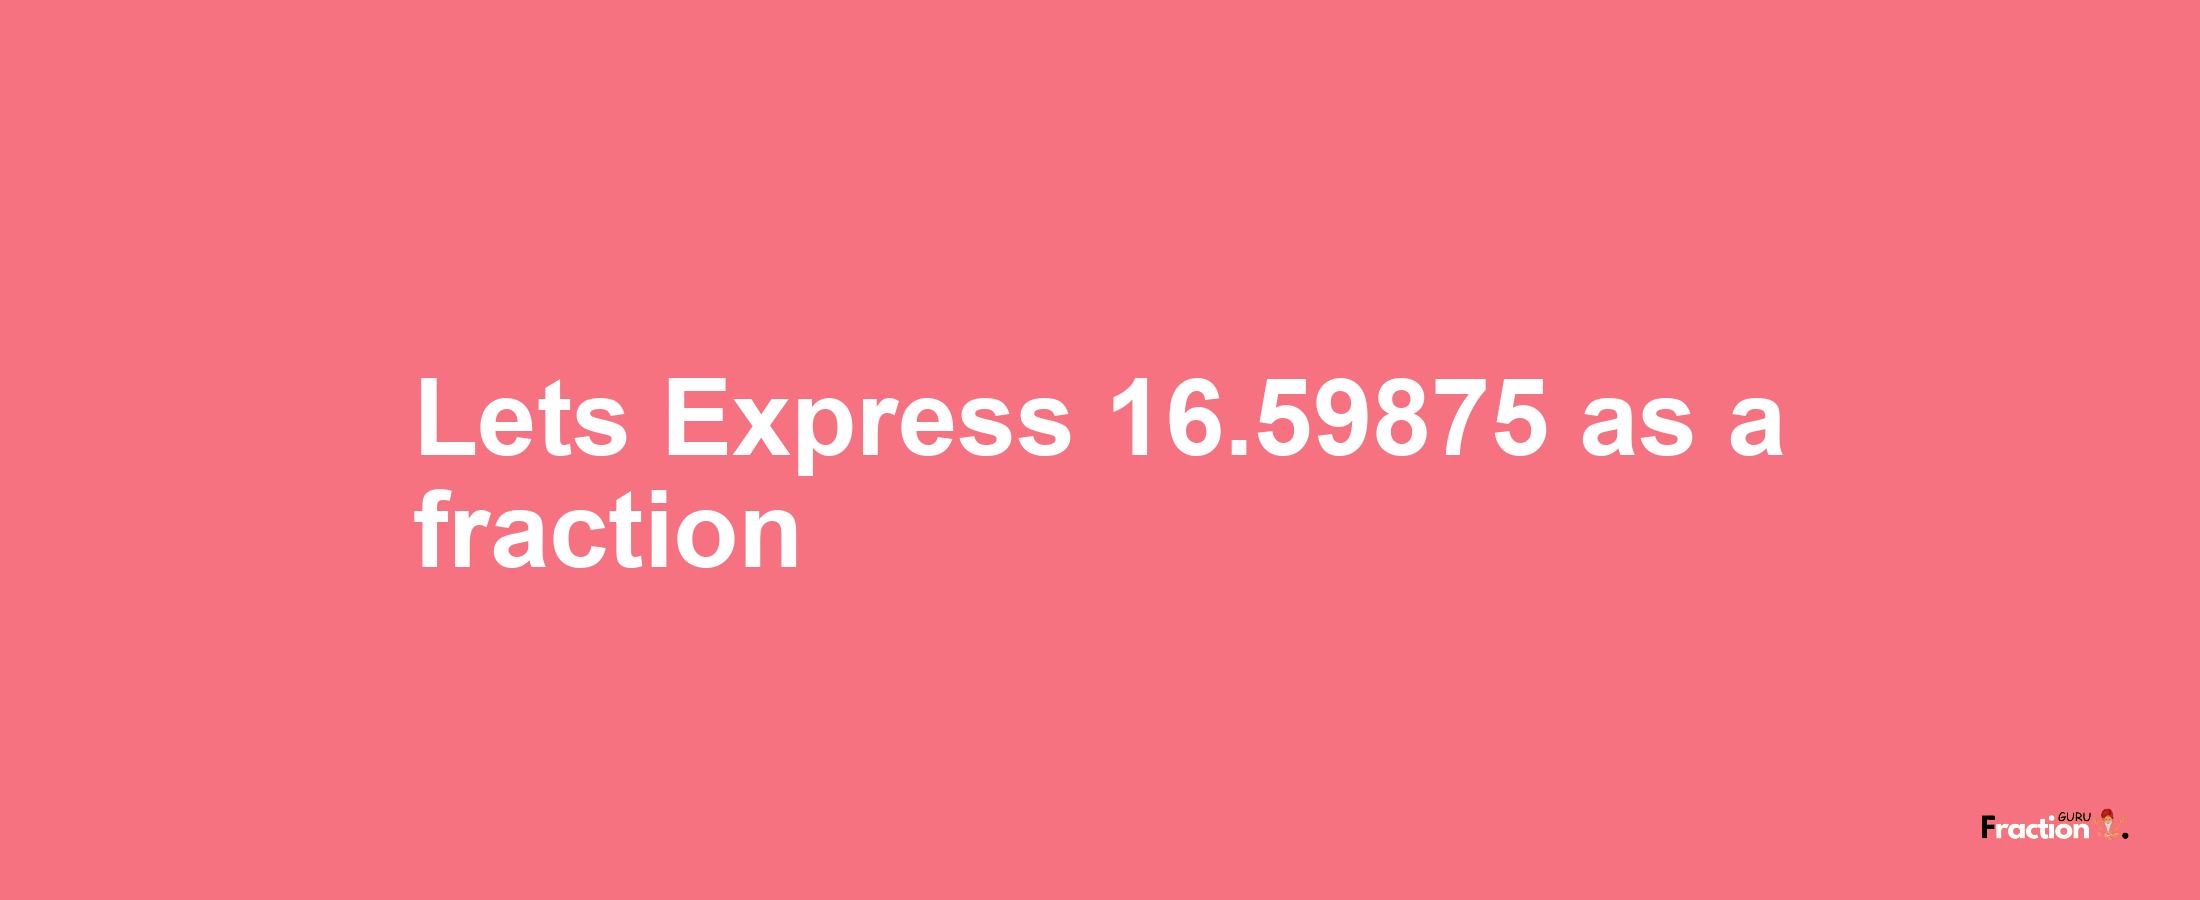 Lets Express 16.59875 as afraction